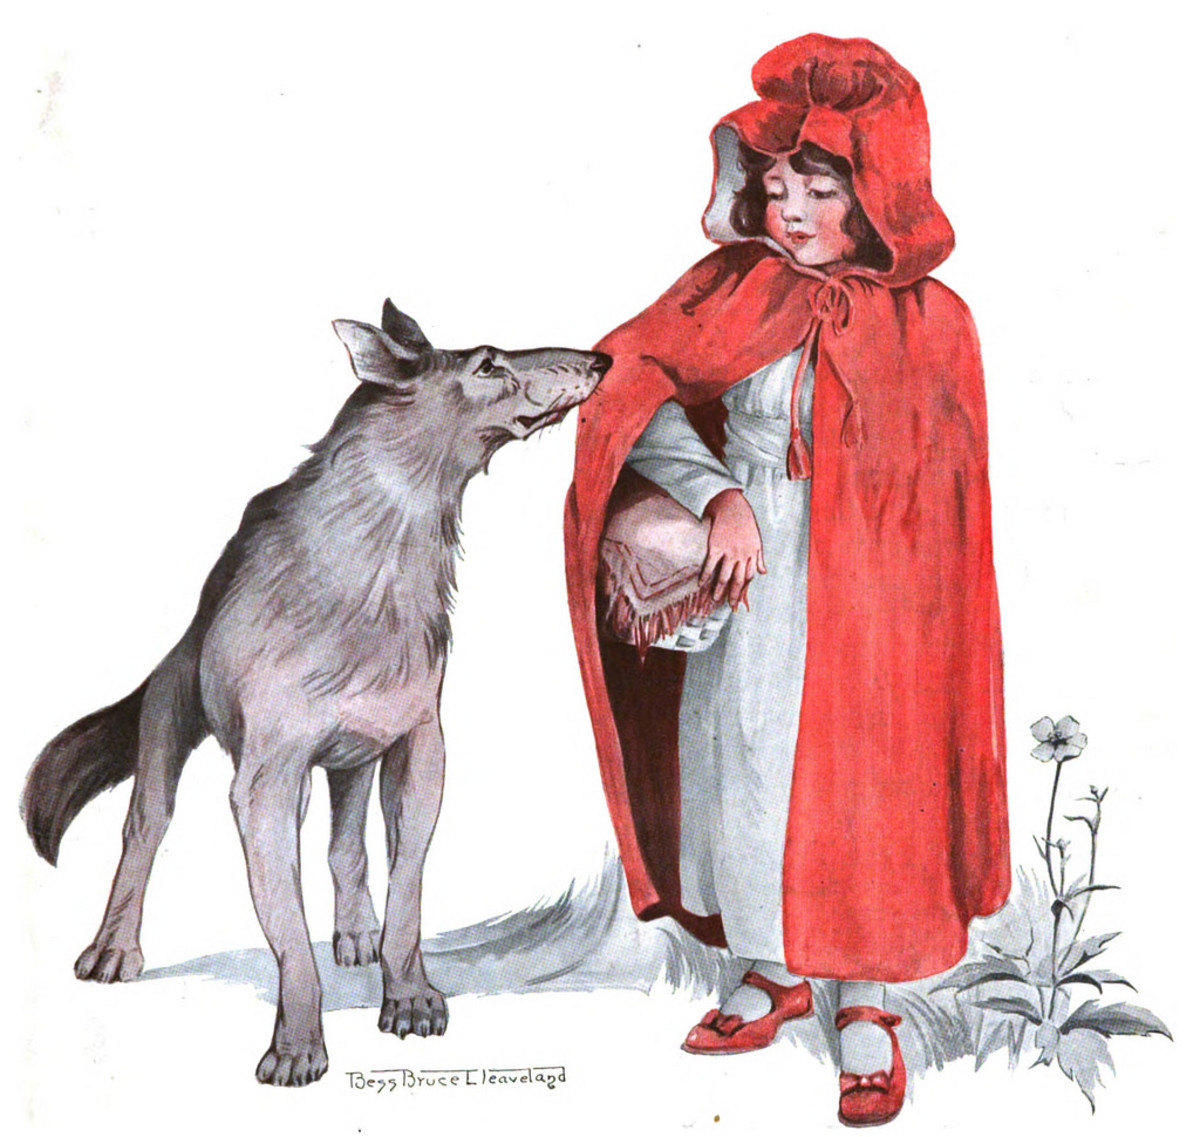 Little Red Riding Hood meets the Wolf